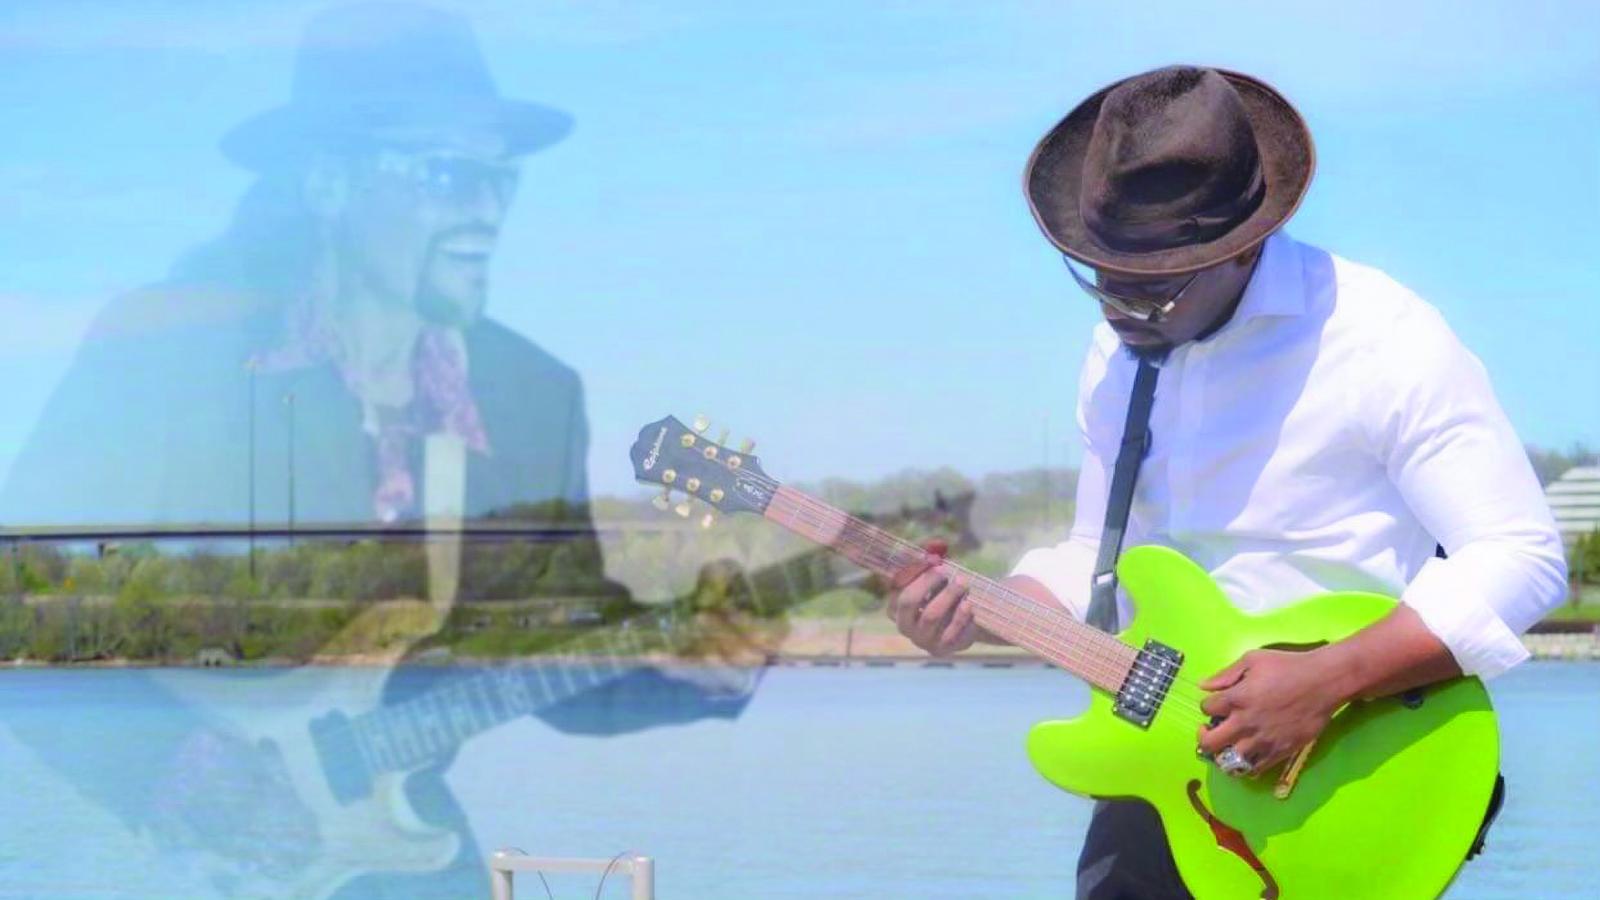 Faded image of guitarist with hat next to left-handed guitarist with green guitar also wearing hat.